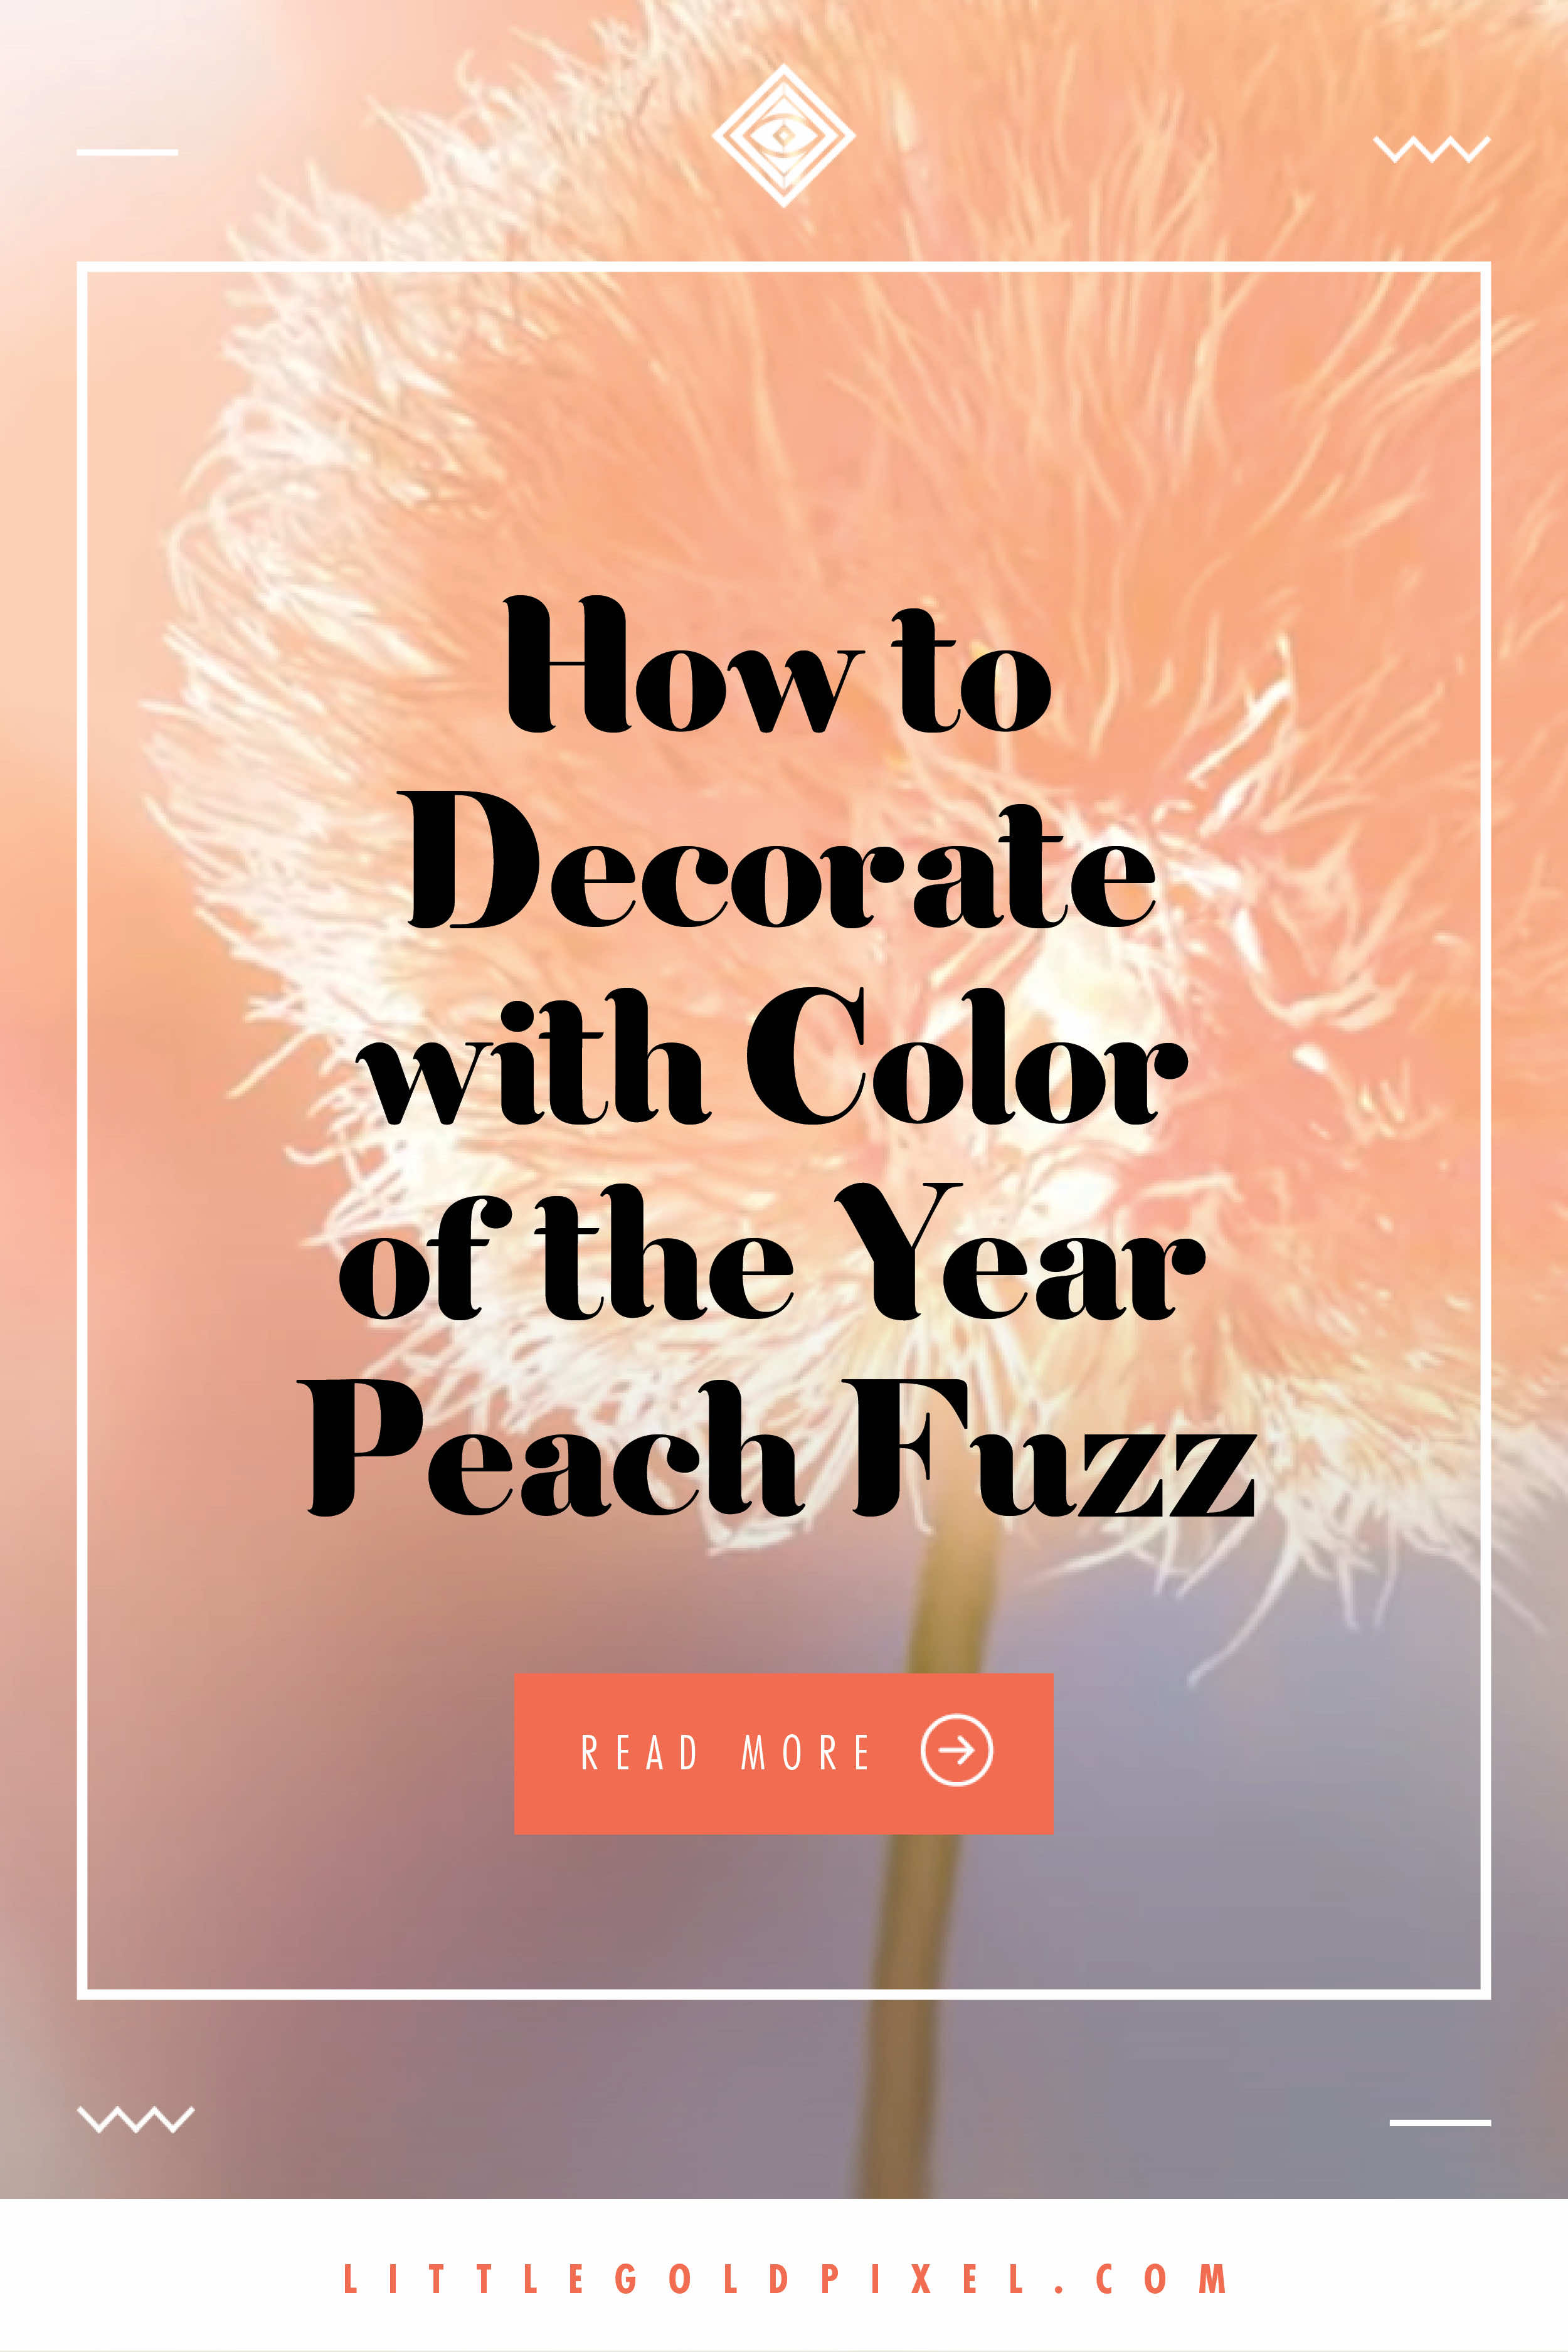 34 Ways to Decorate with Peach Fuzz (the 2024 Color of the Year) • Little Gold Pixel • How to easily incorporate 2024 color of the year peach fuzz decor into your home (with 35 ideas!).